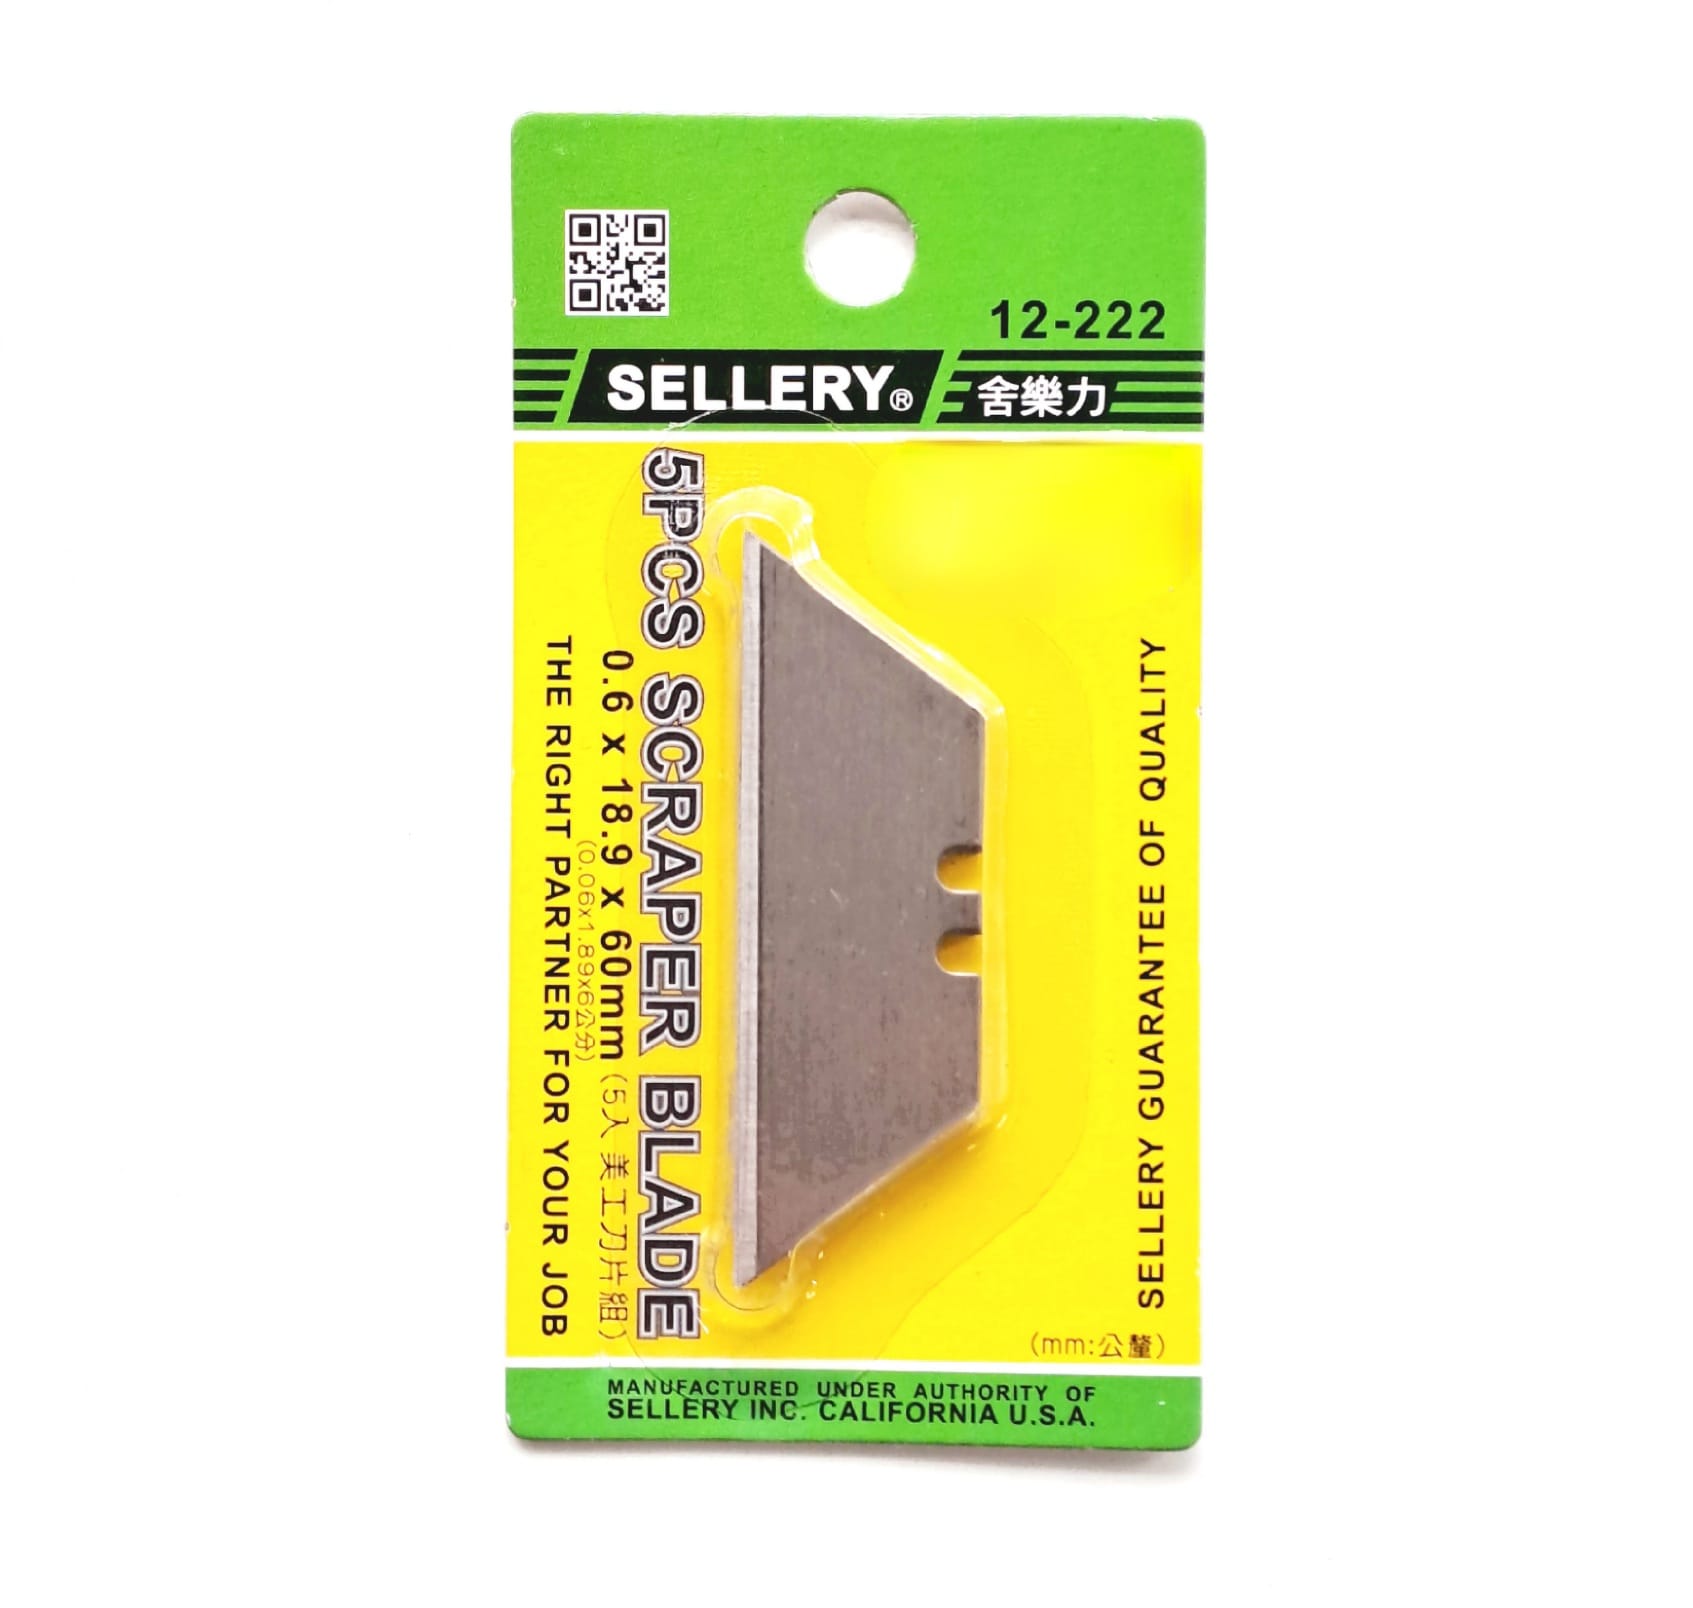 Sellery 12-222 5pc Scraper Blade Set, 0.6x18.9x60mm (Suited for SEL-12-221)